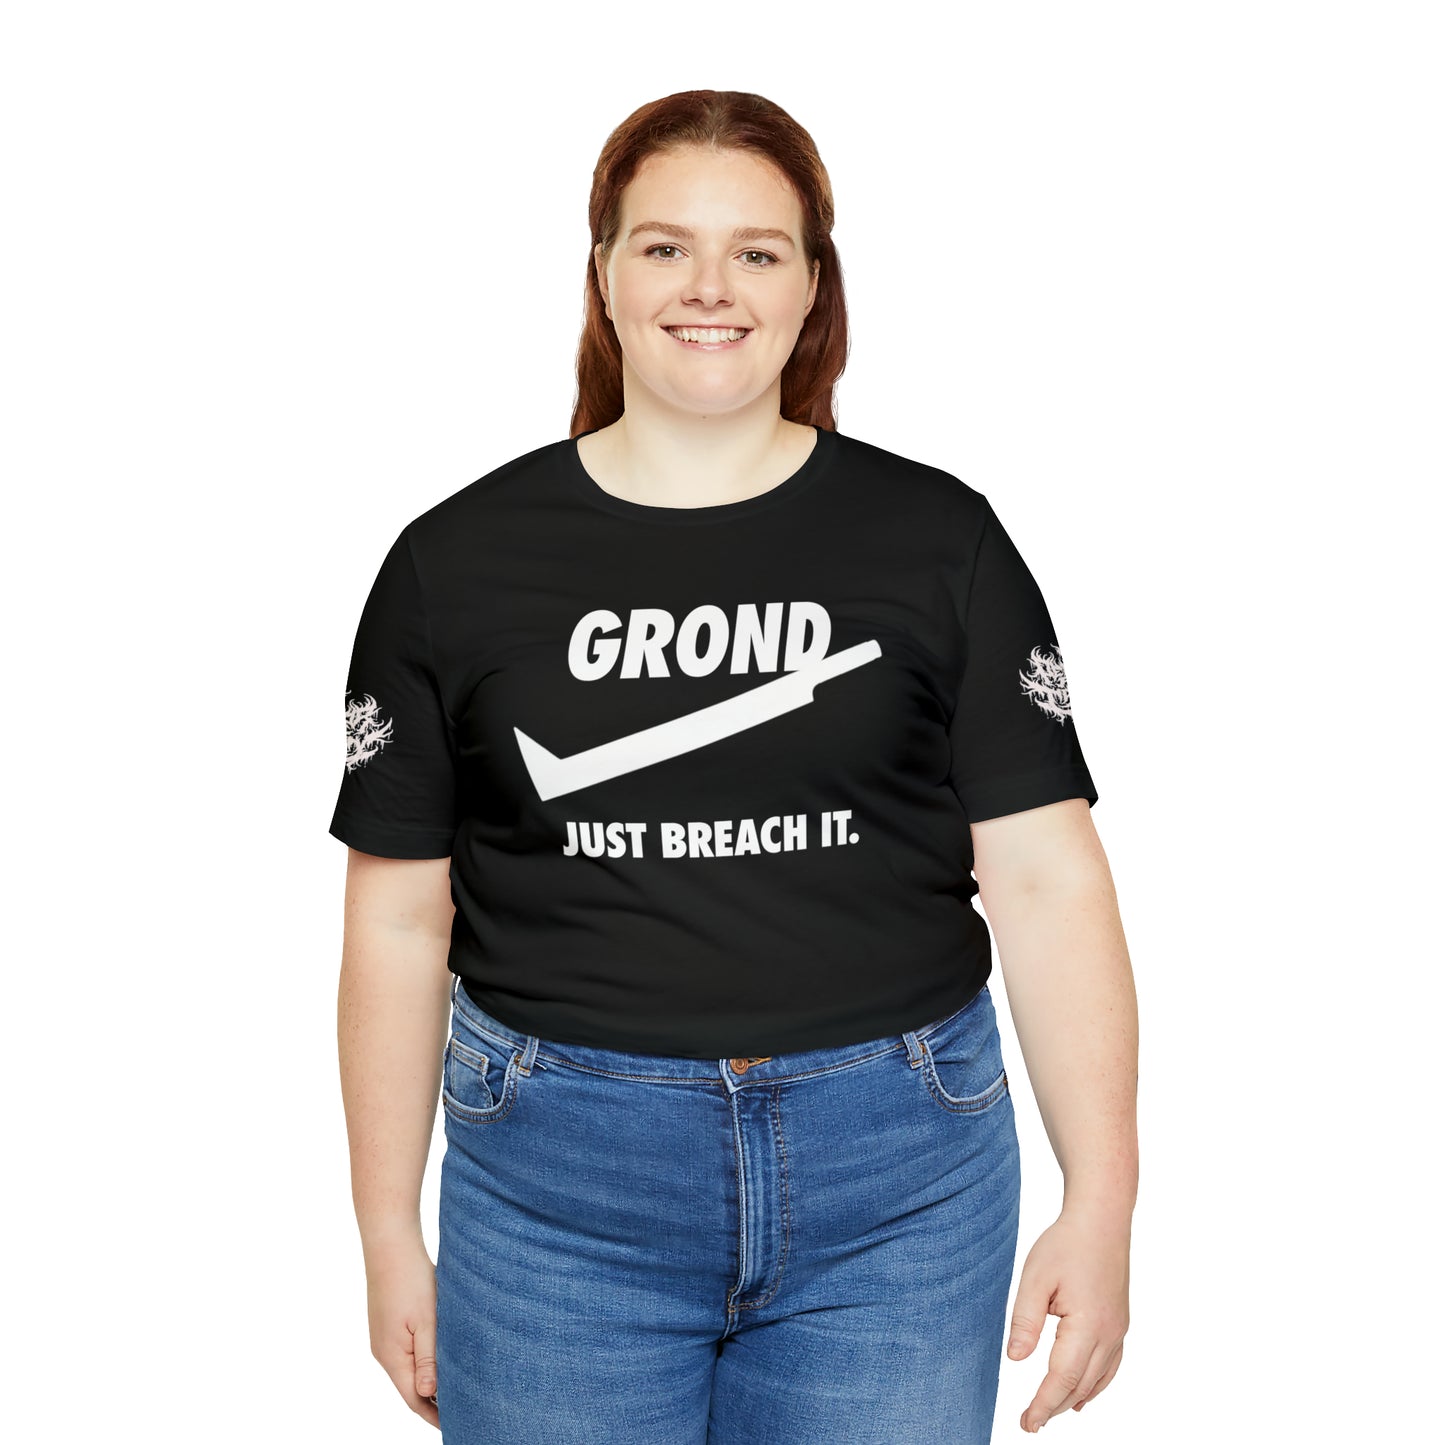 The Pelennor Field Tragedy Grond Tee